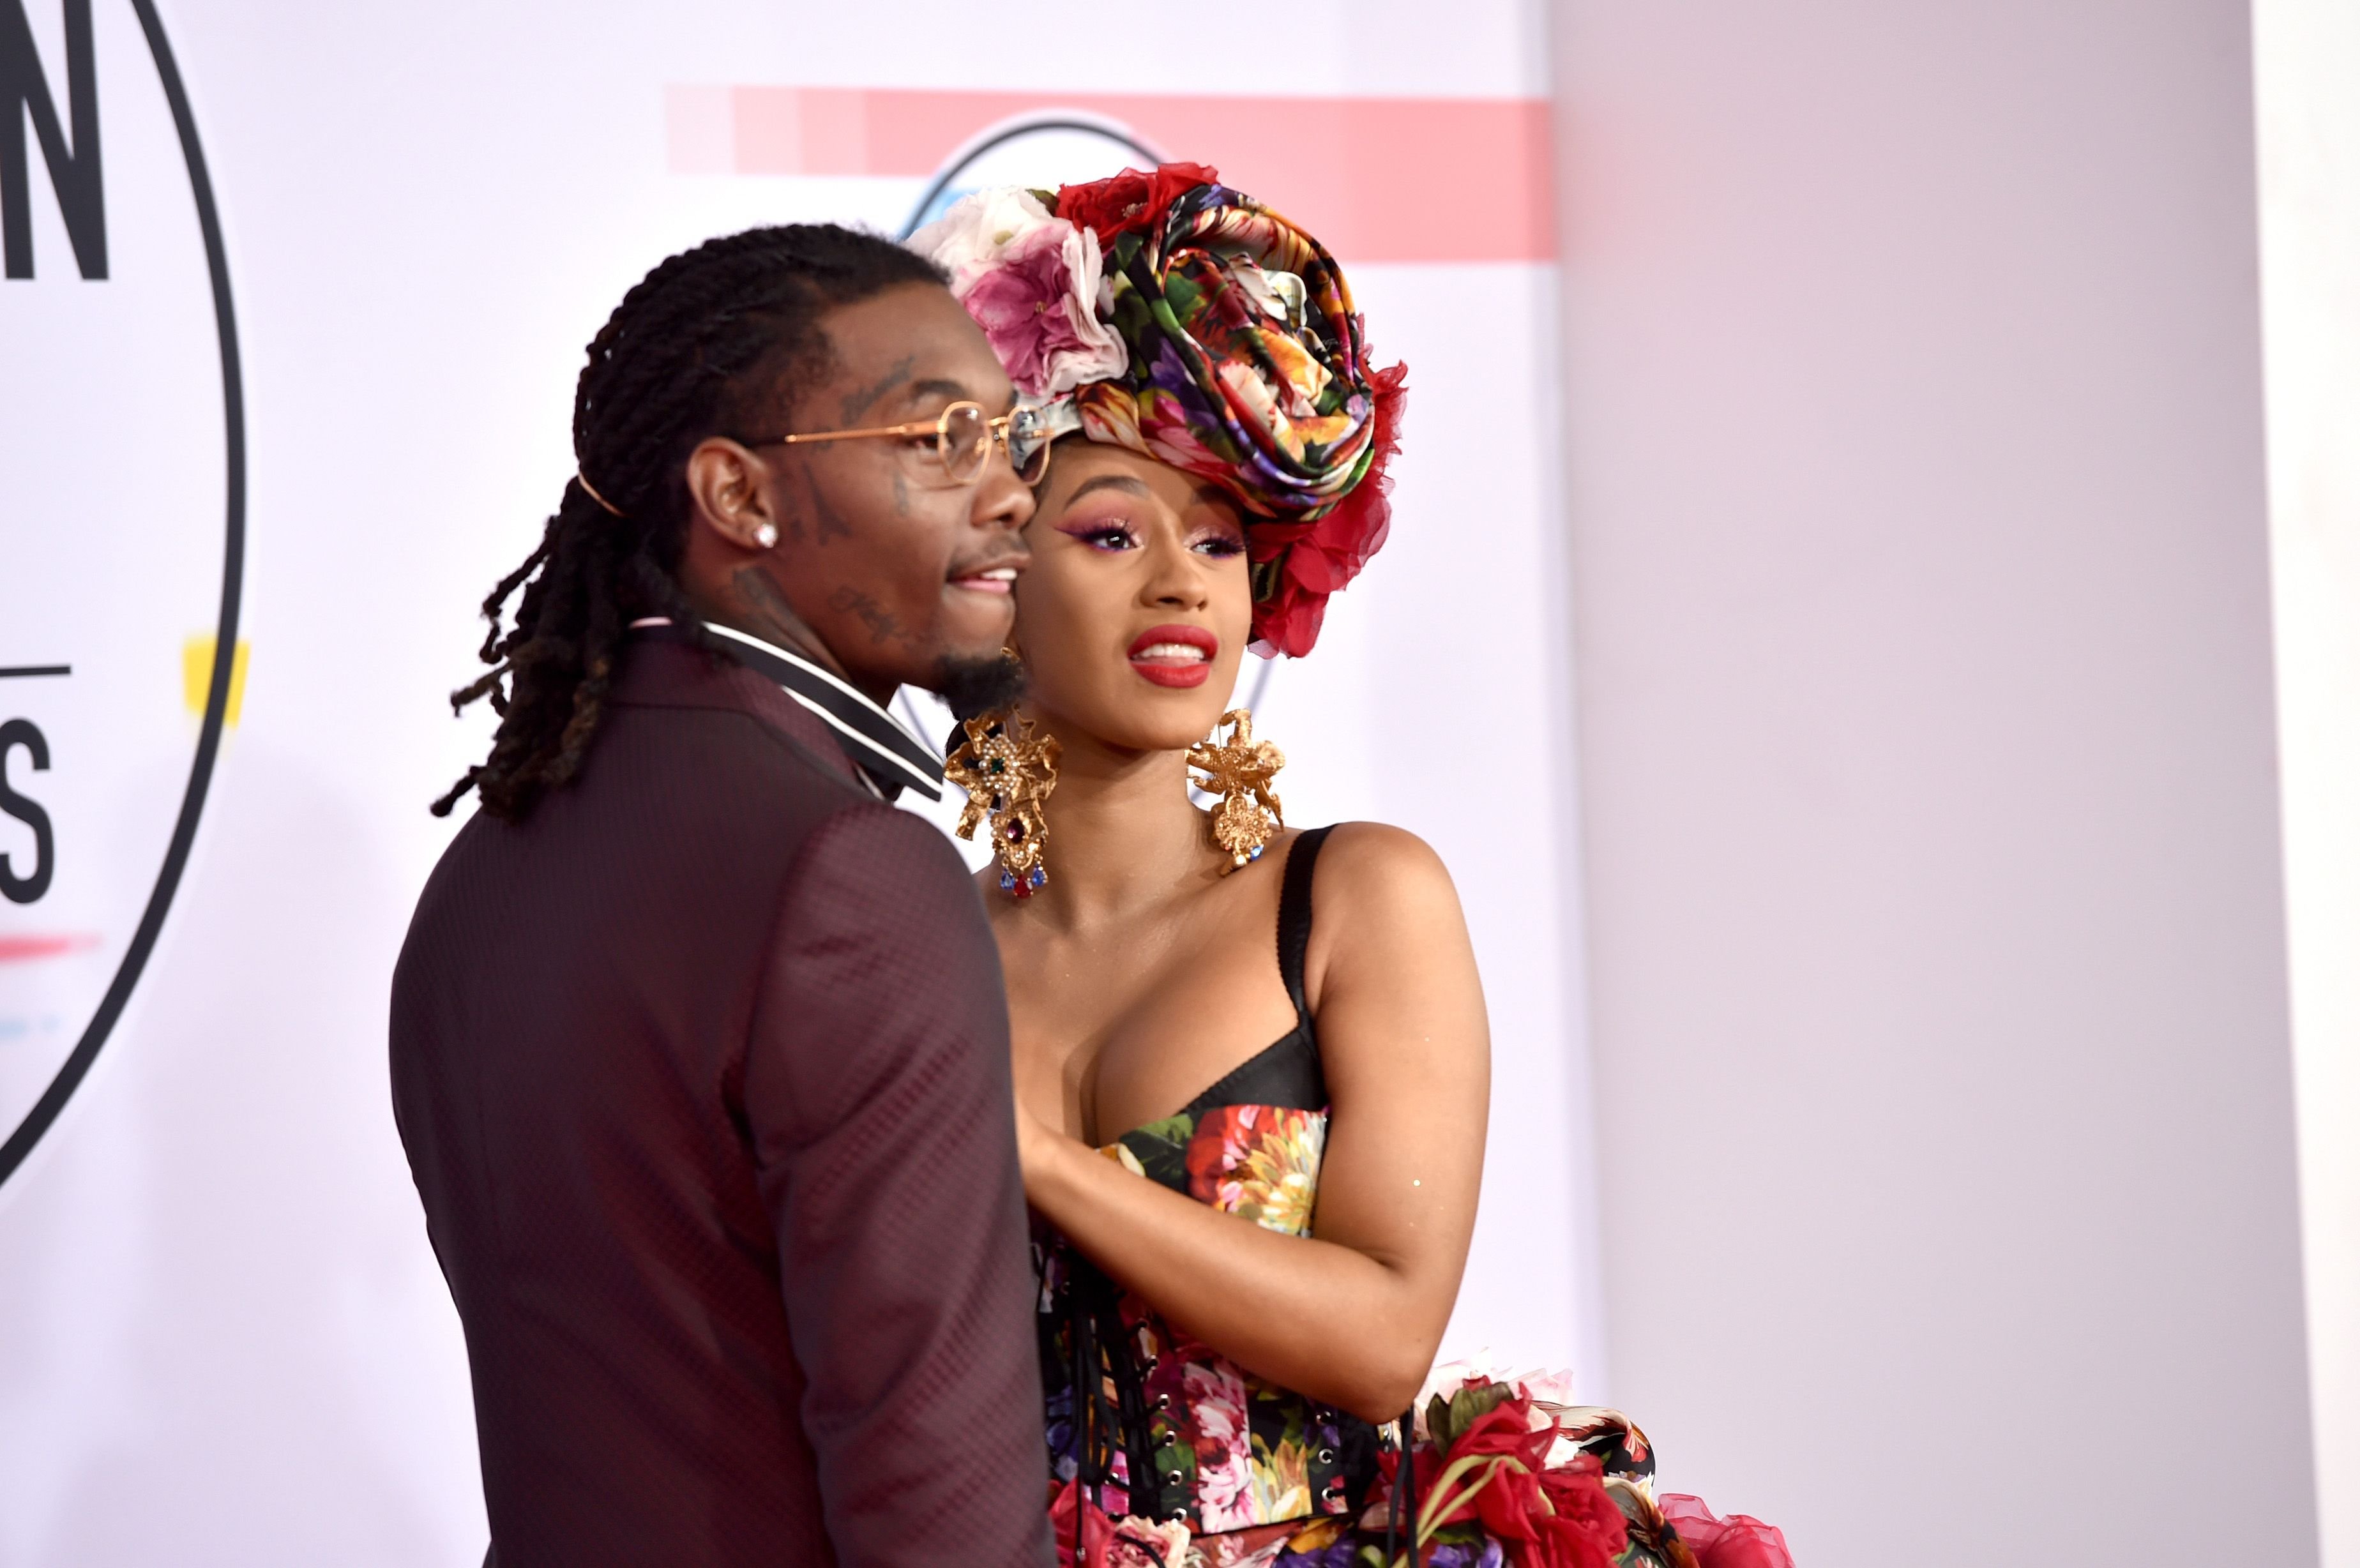 Offset and Cardi B at the American Music Awards in Los Angeles on October 9, 2018. | Photo: Getty Images